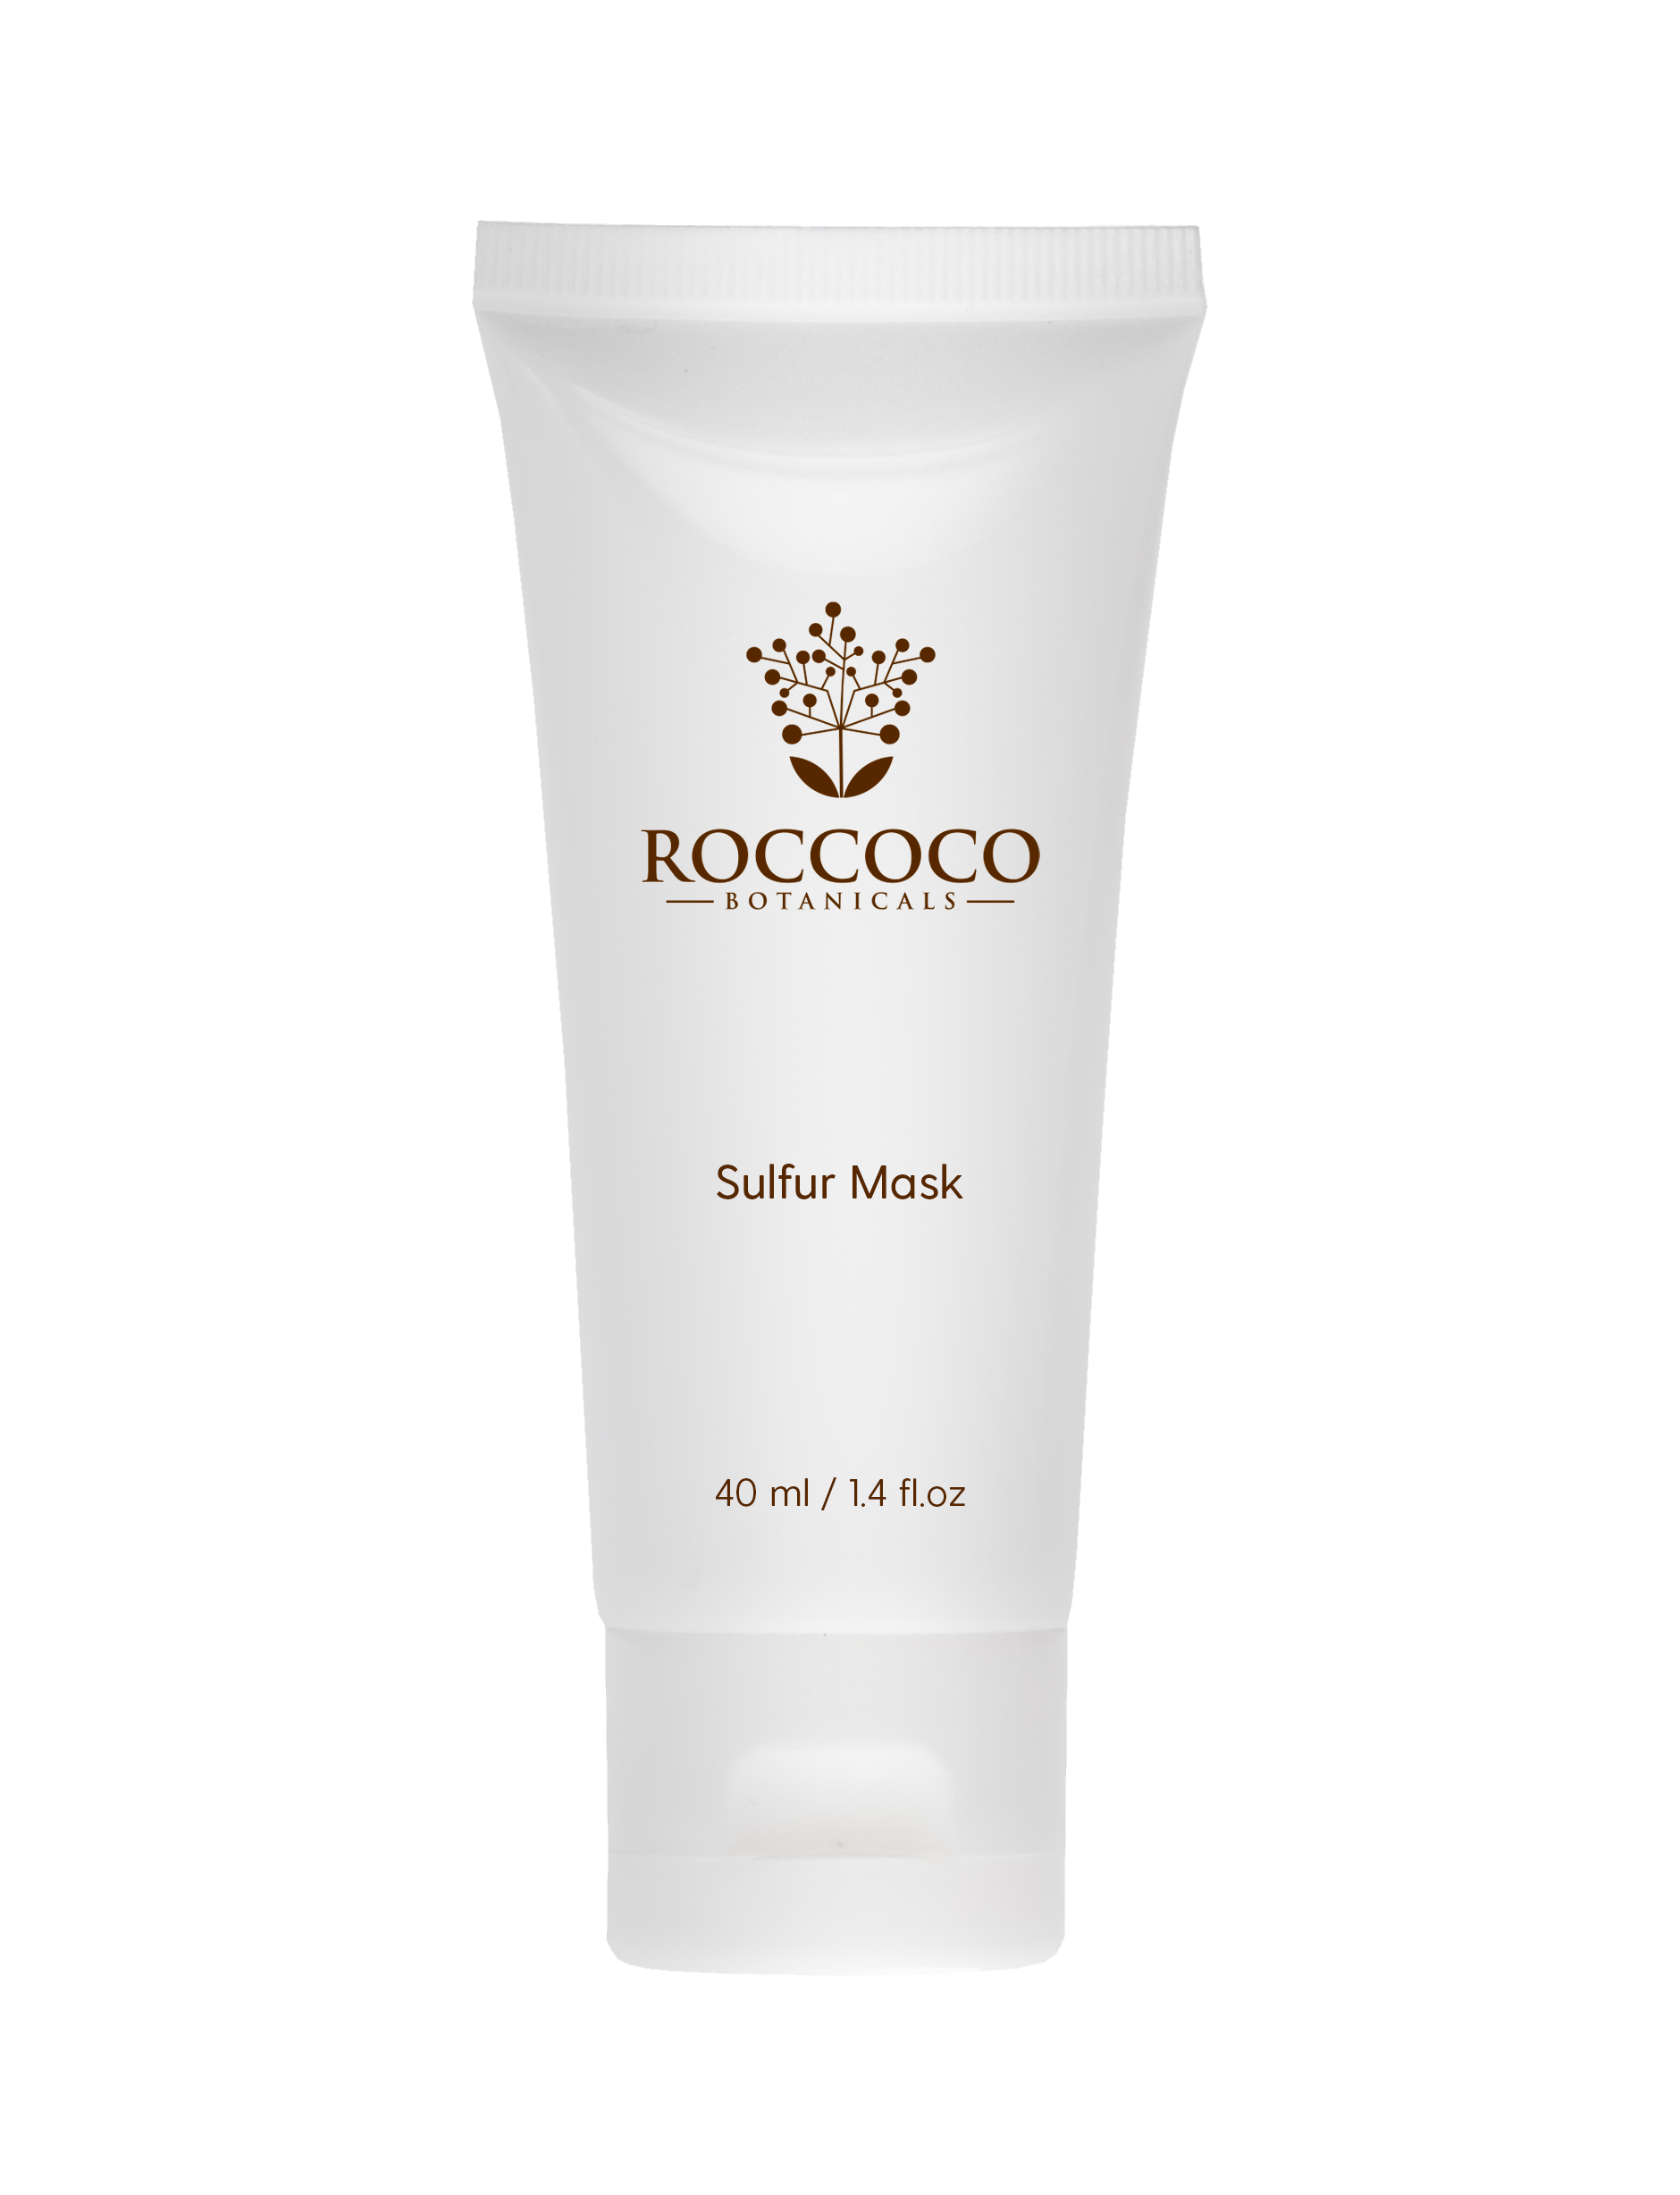 Roccoco Botanicals Sulfur Mask - Click to Buy!